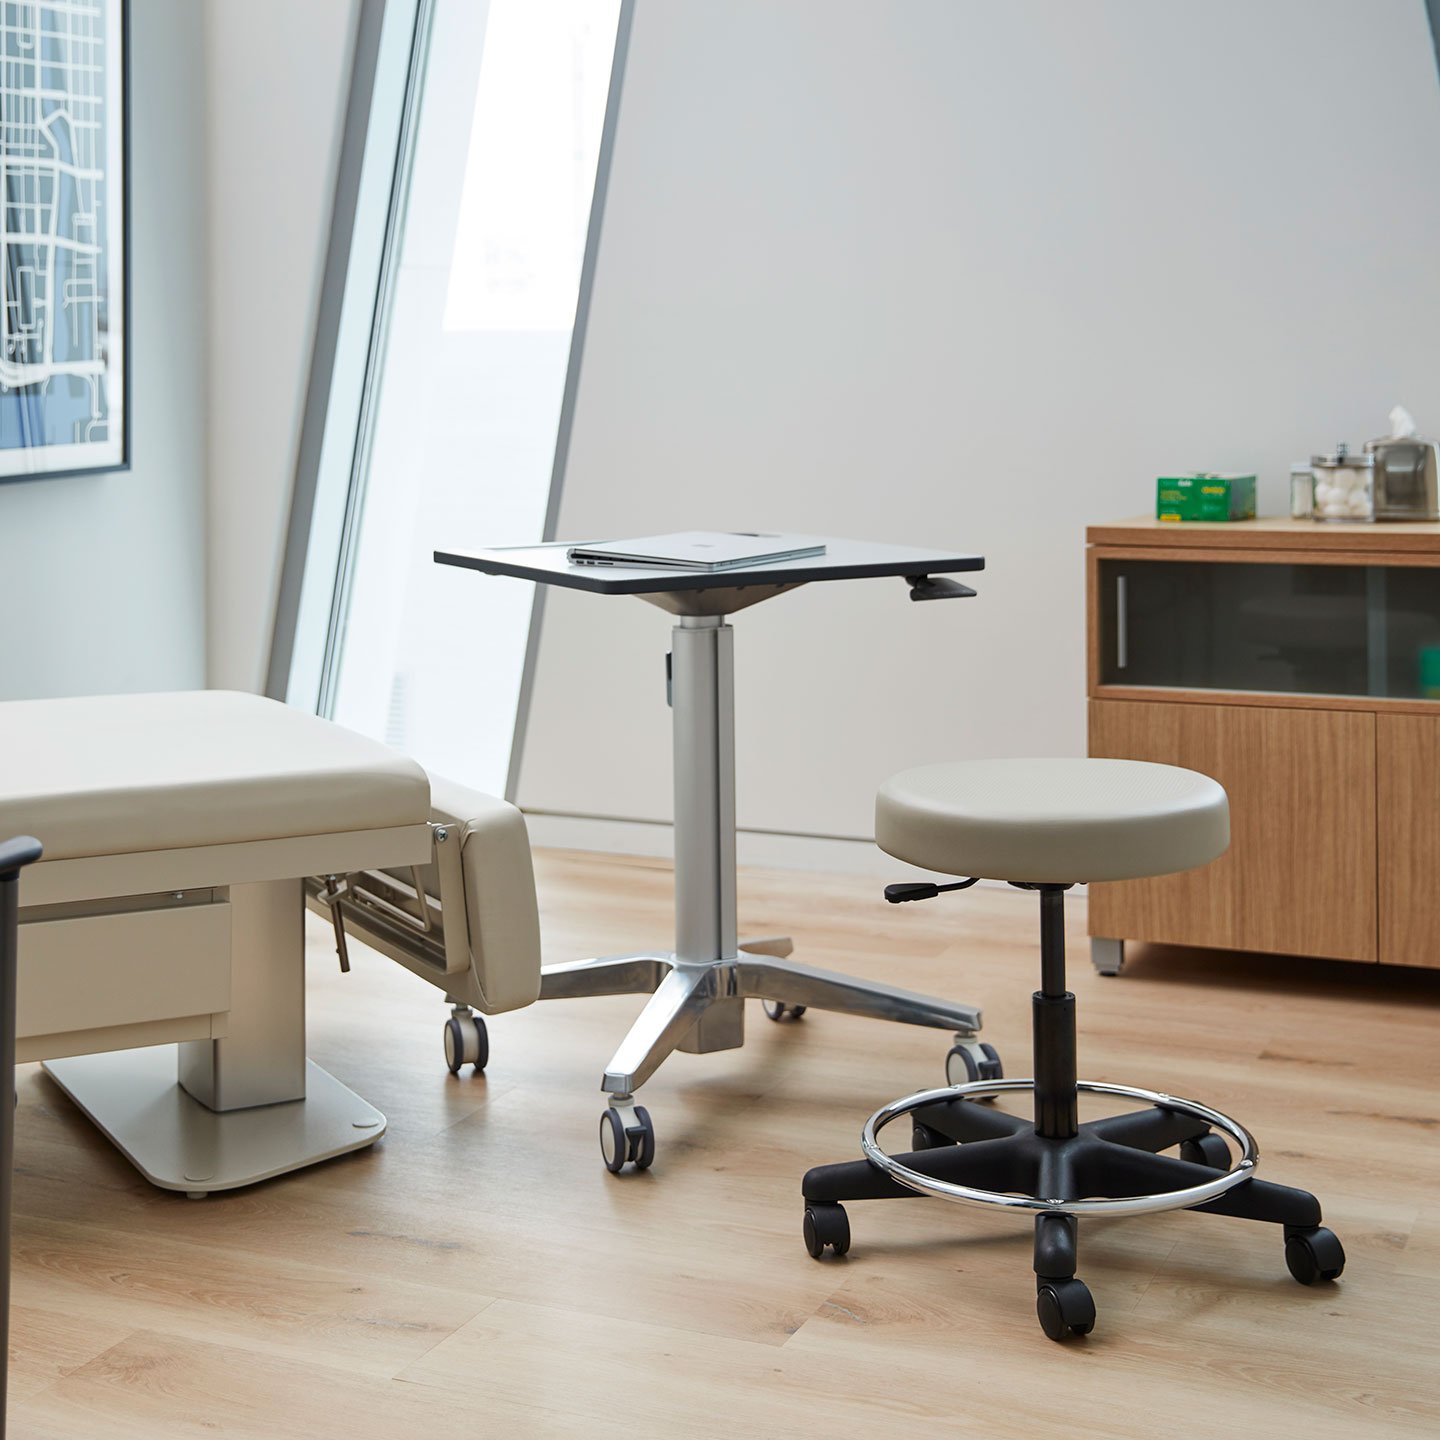 Haworth Exam stool in beige seating and swivel base in a doctor's consultation room